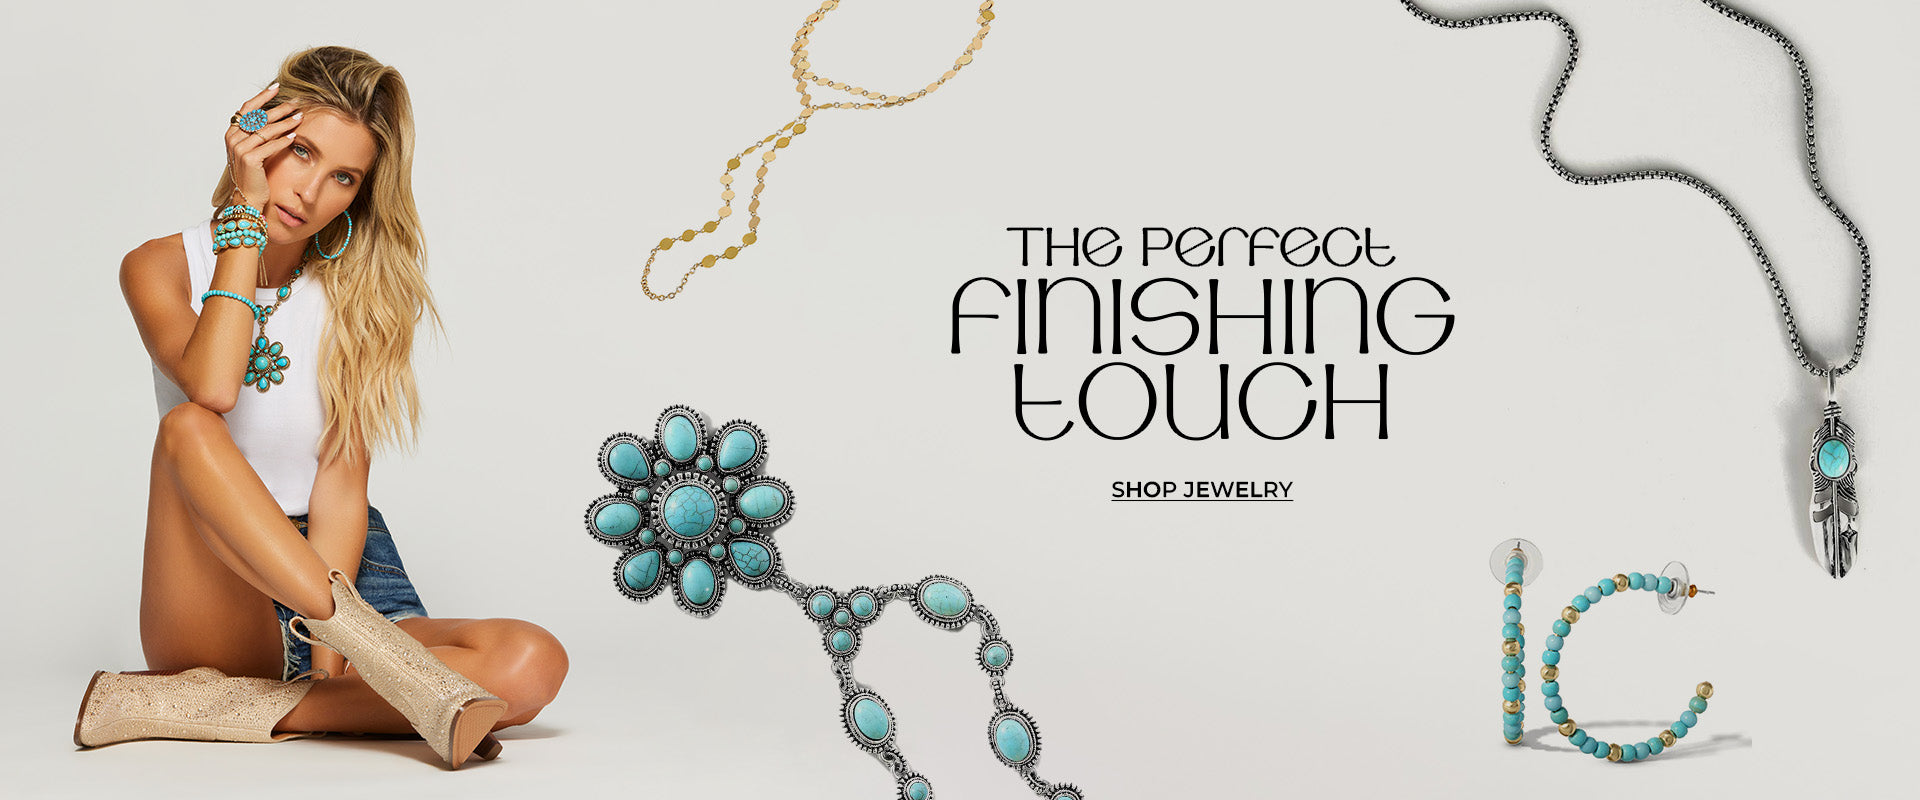 The Finishing Touch Shop Jewelry